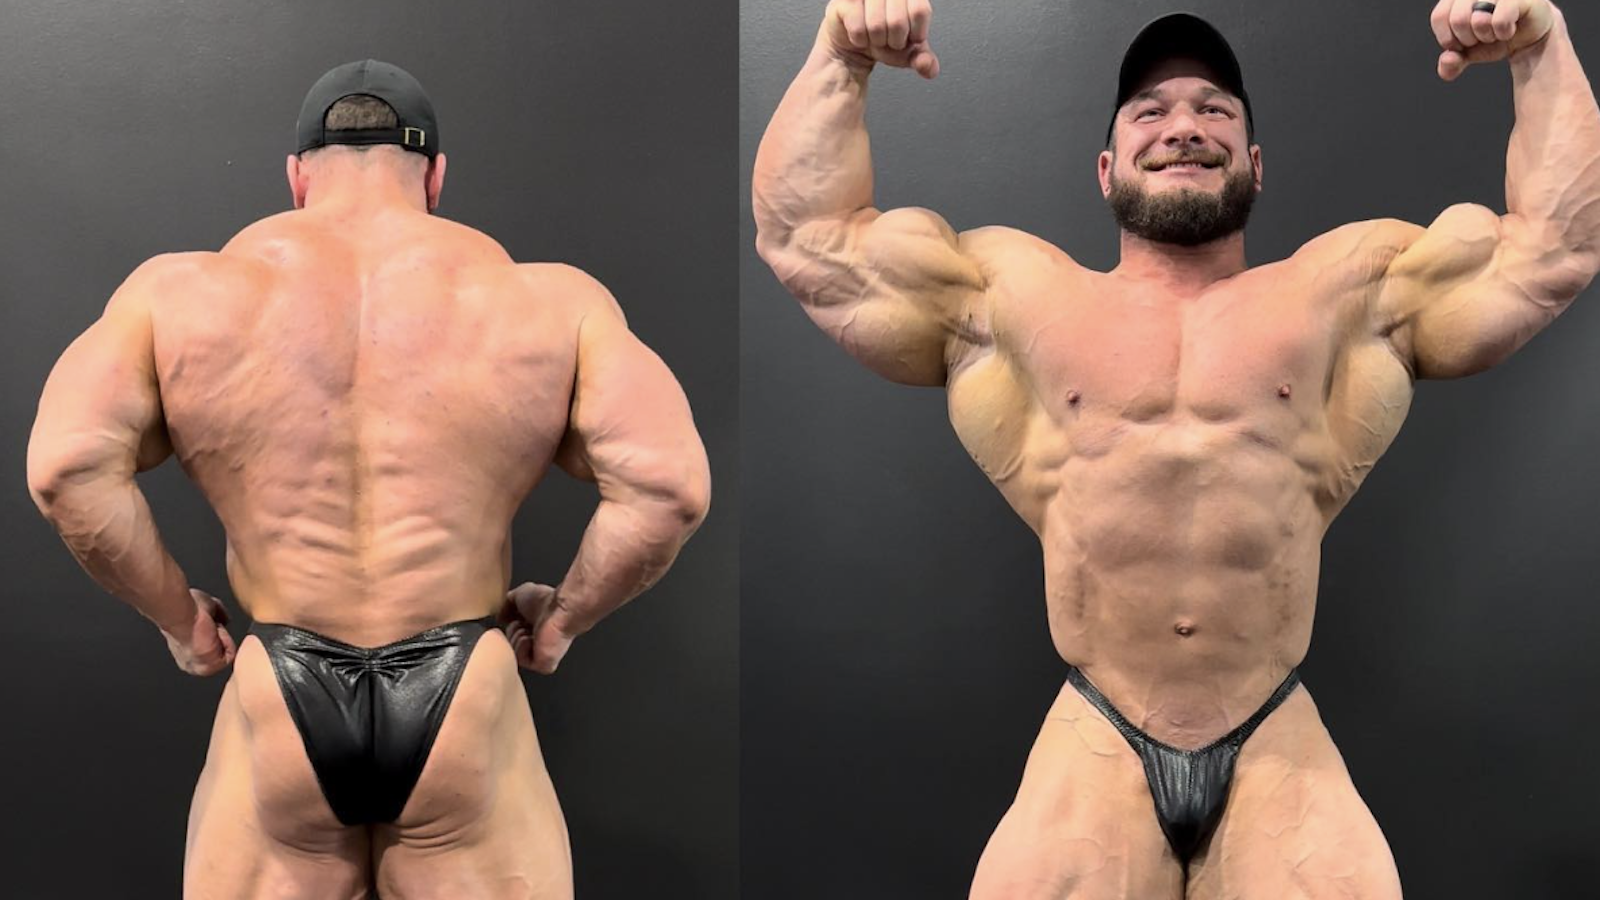 a good pose for muscle flex｜TikTok Search